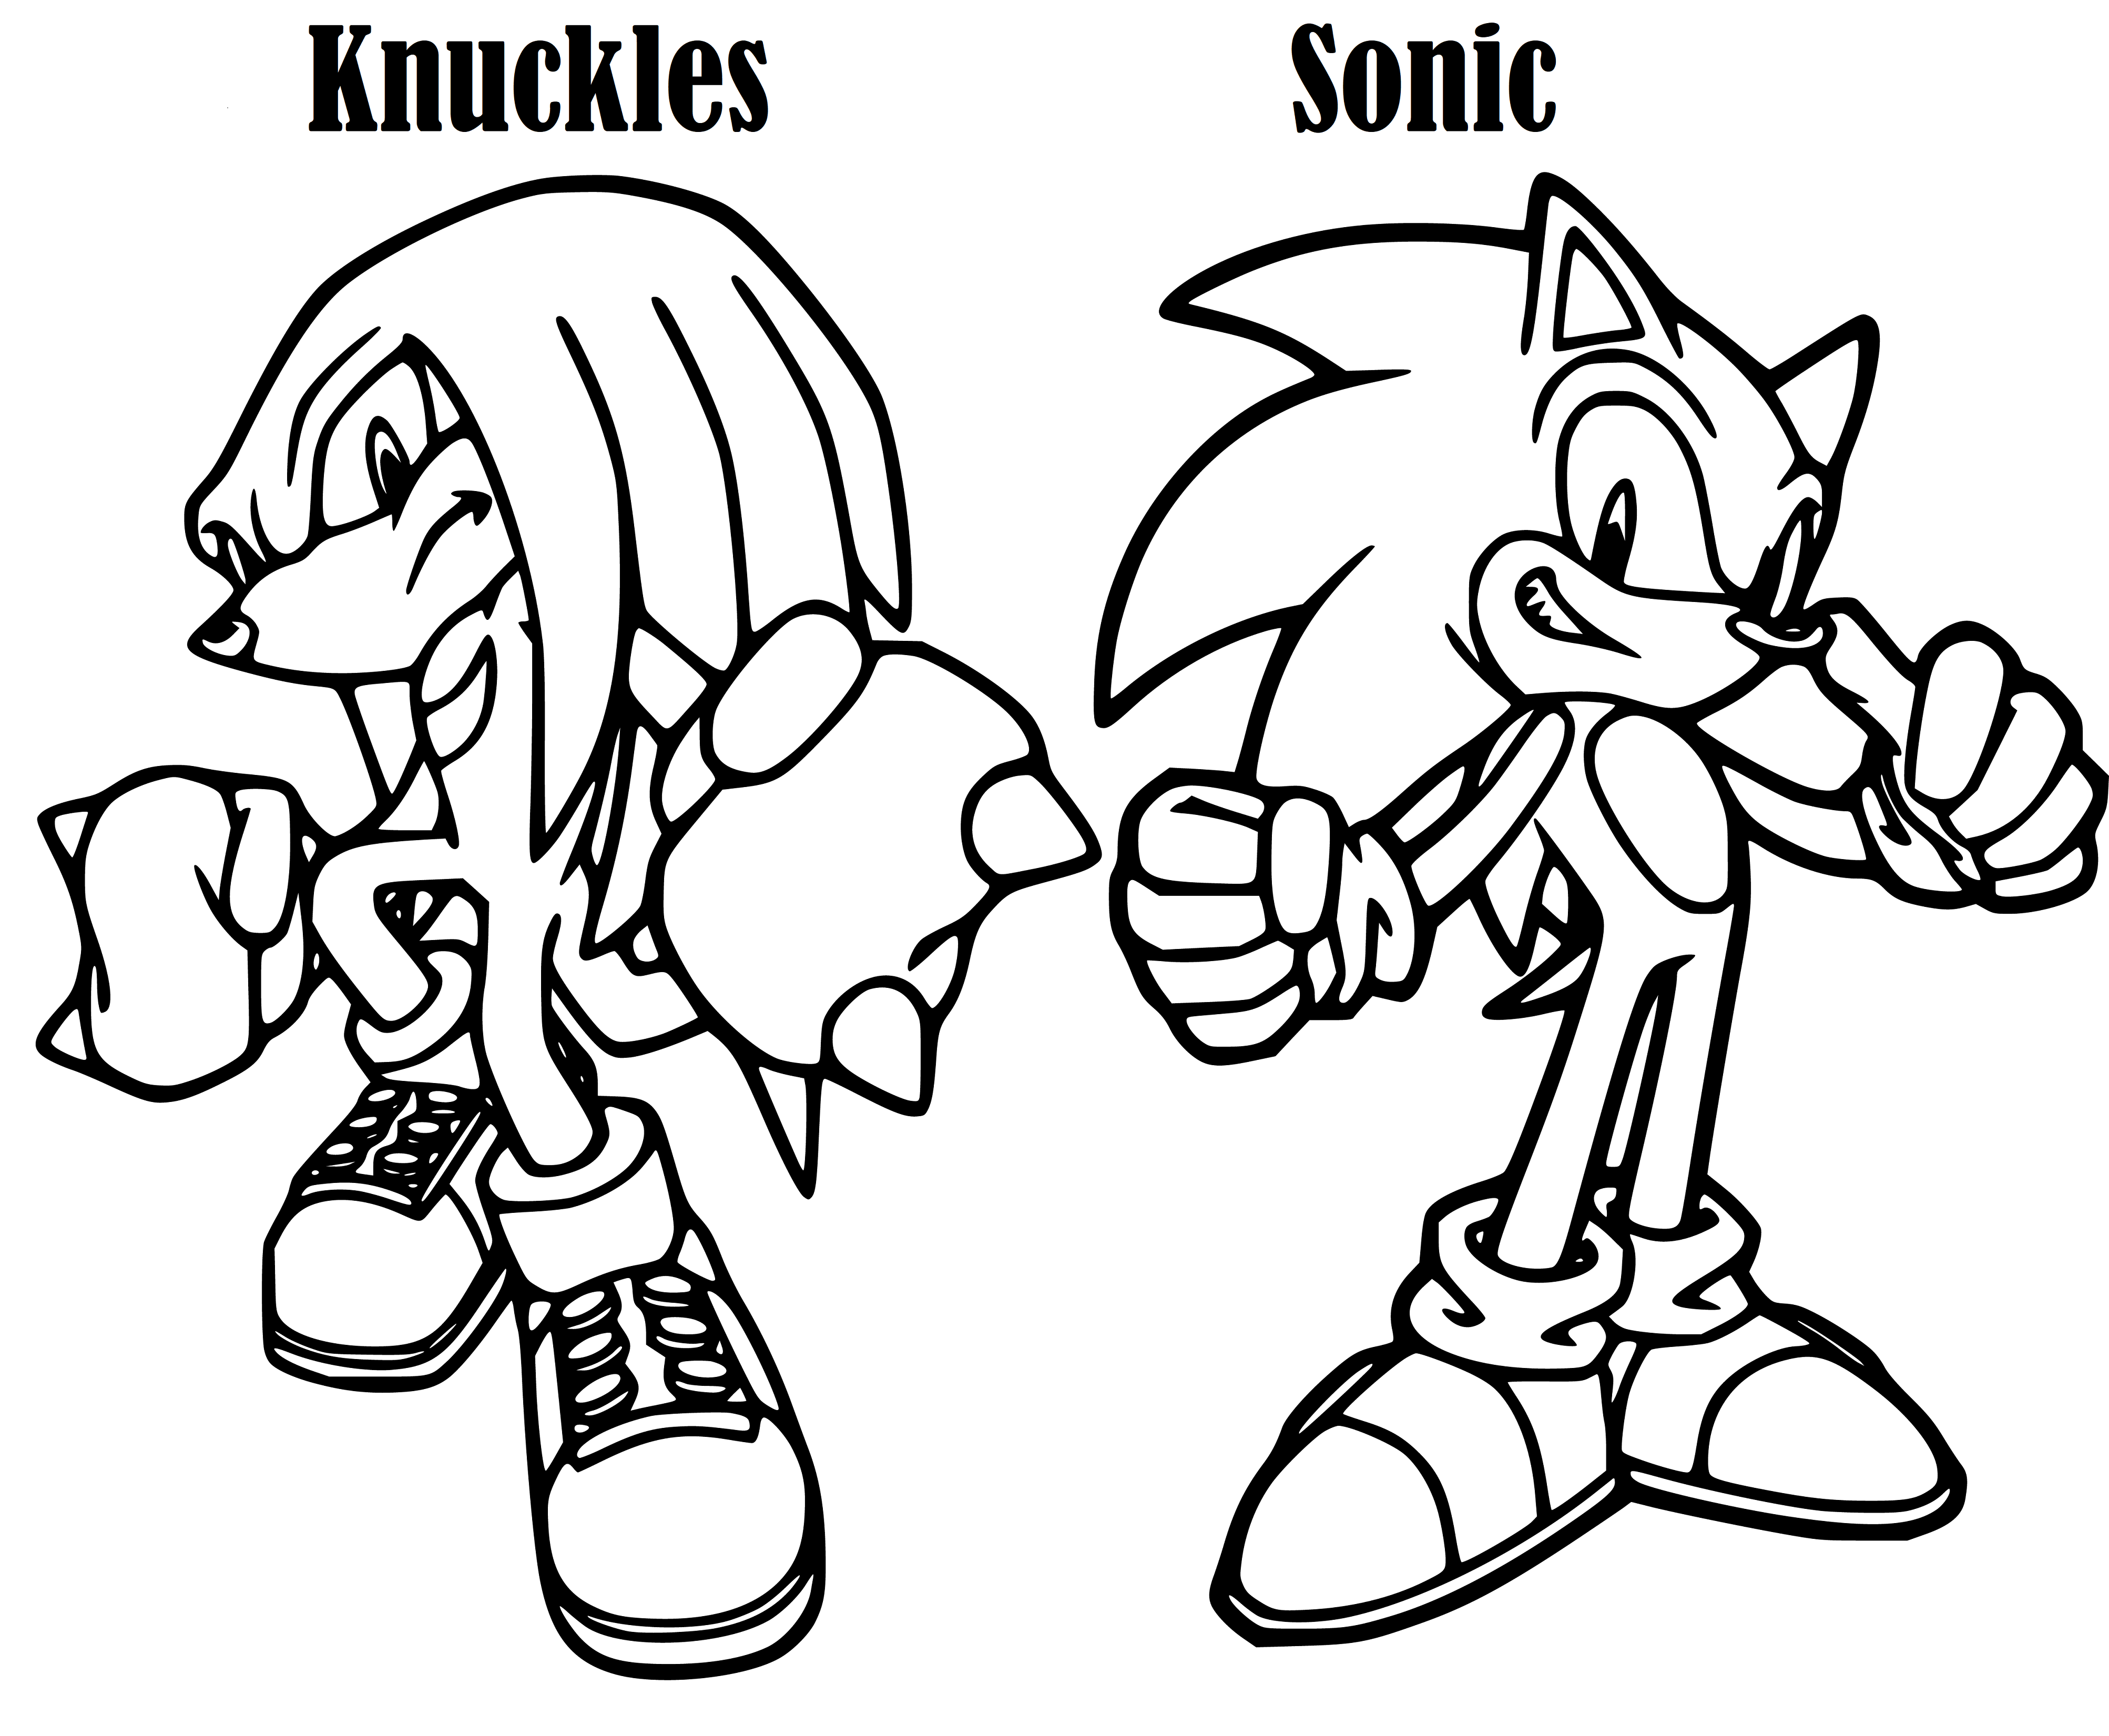 Printable Knuckles and Sonic Coloring Page for kids.